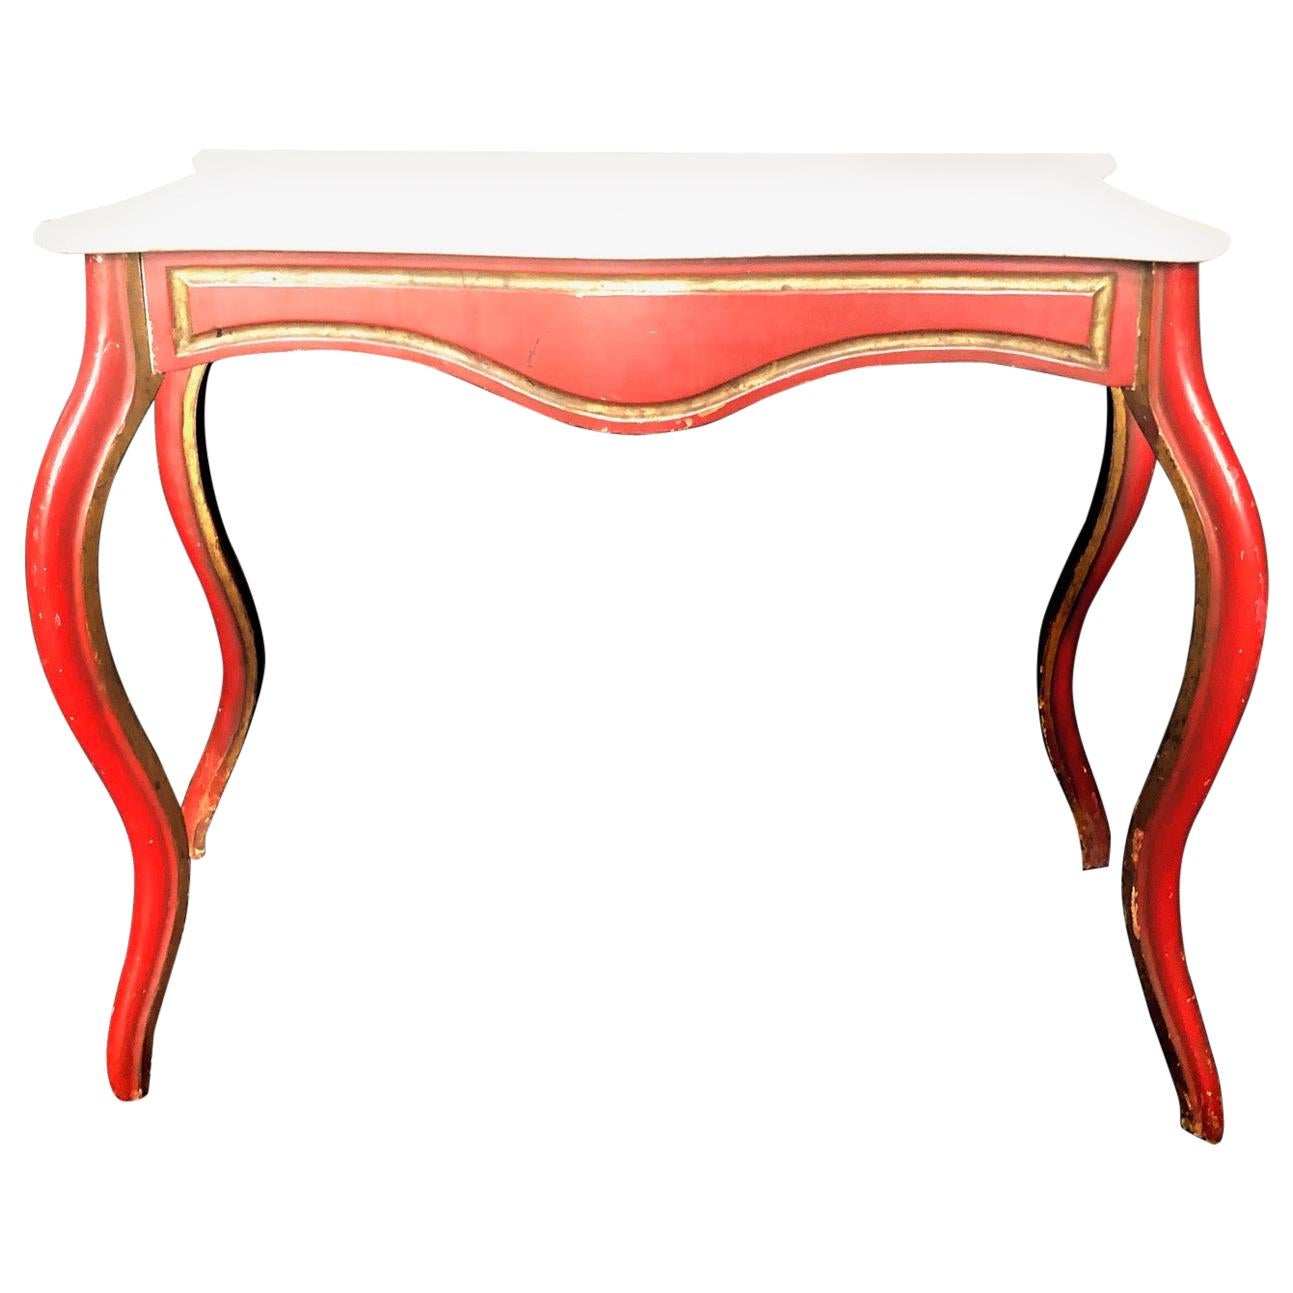 Sensational French Louis XV Cherry Red Painted Console with Carrera Marble